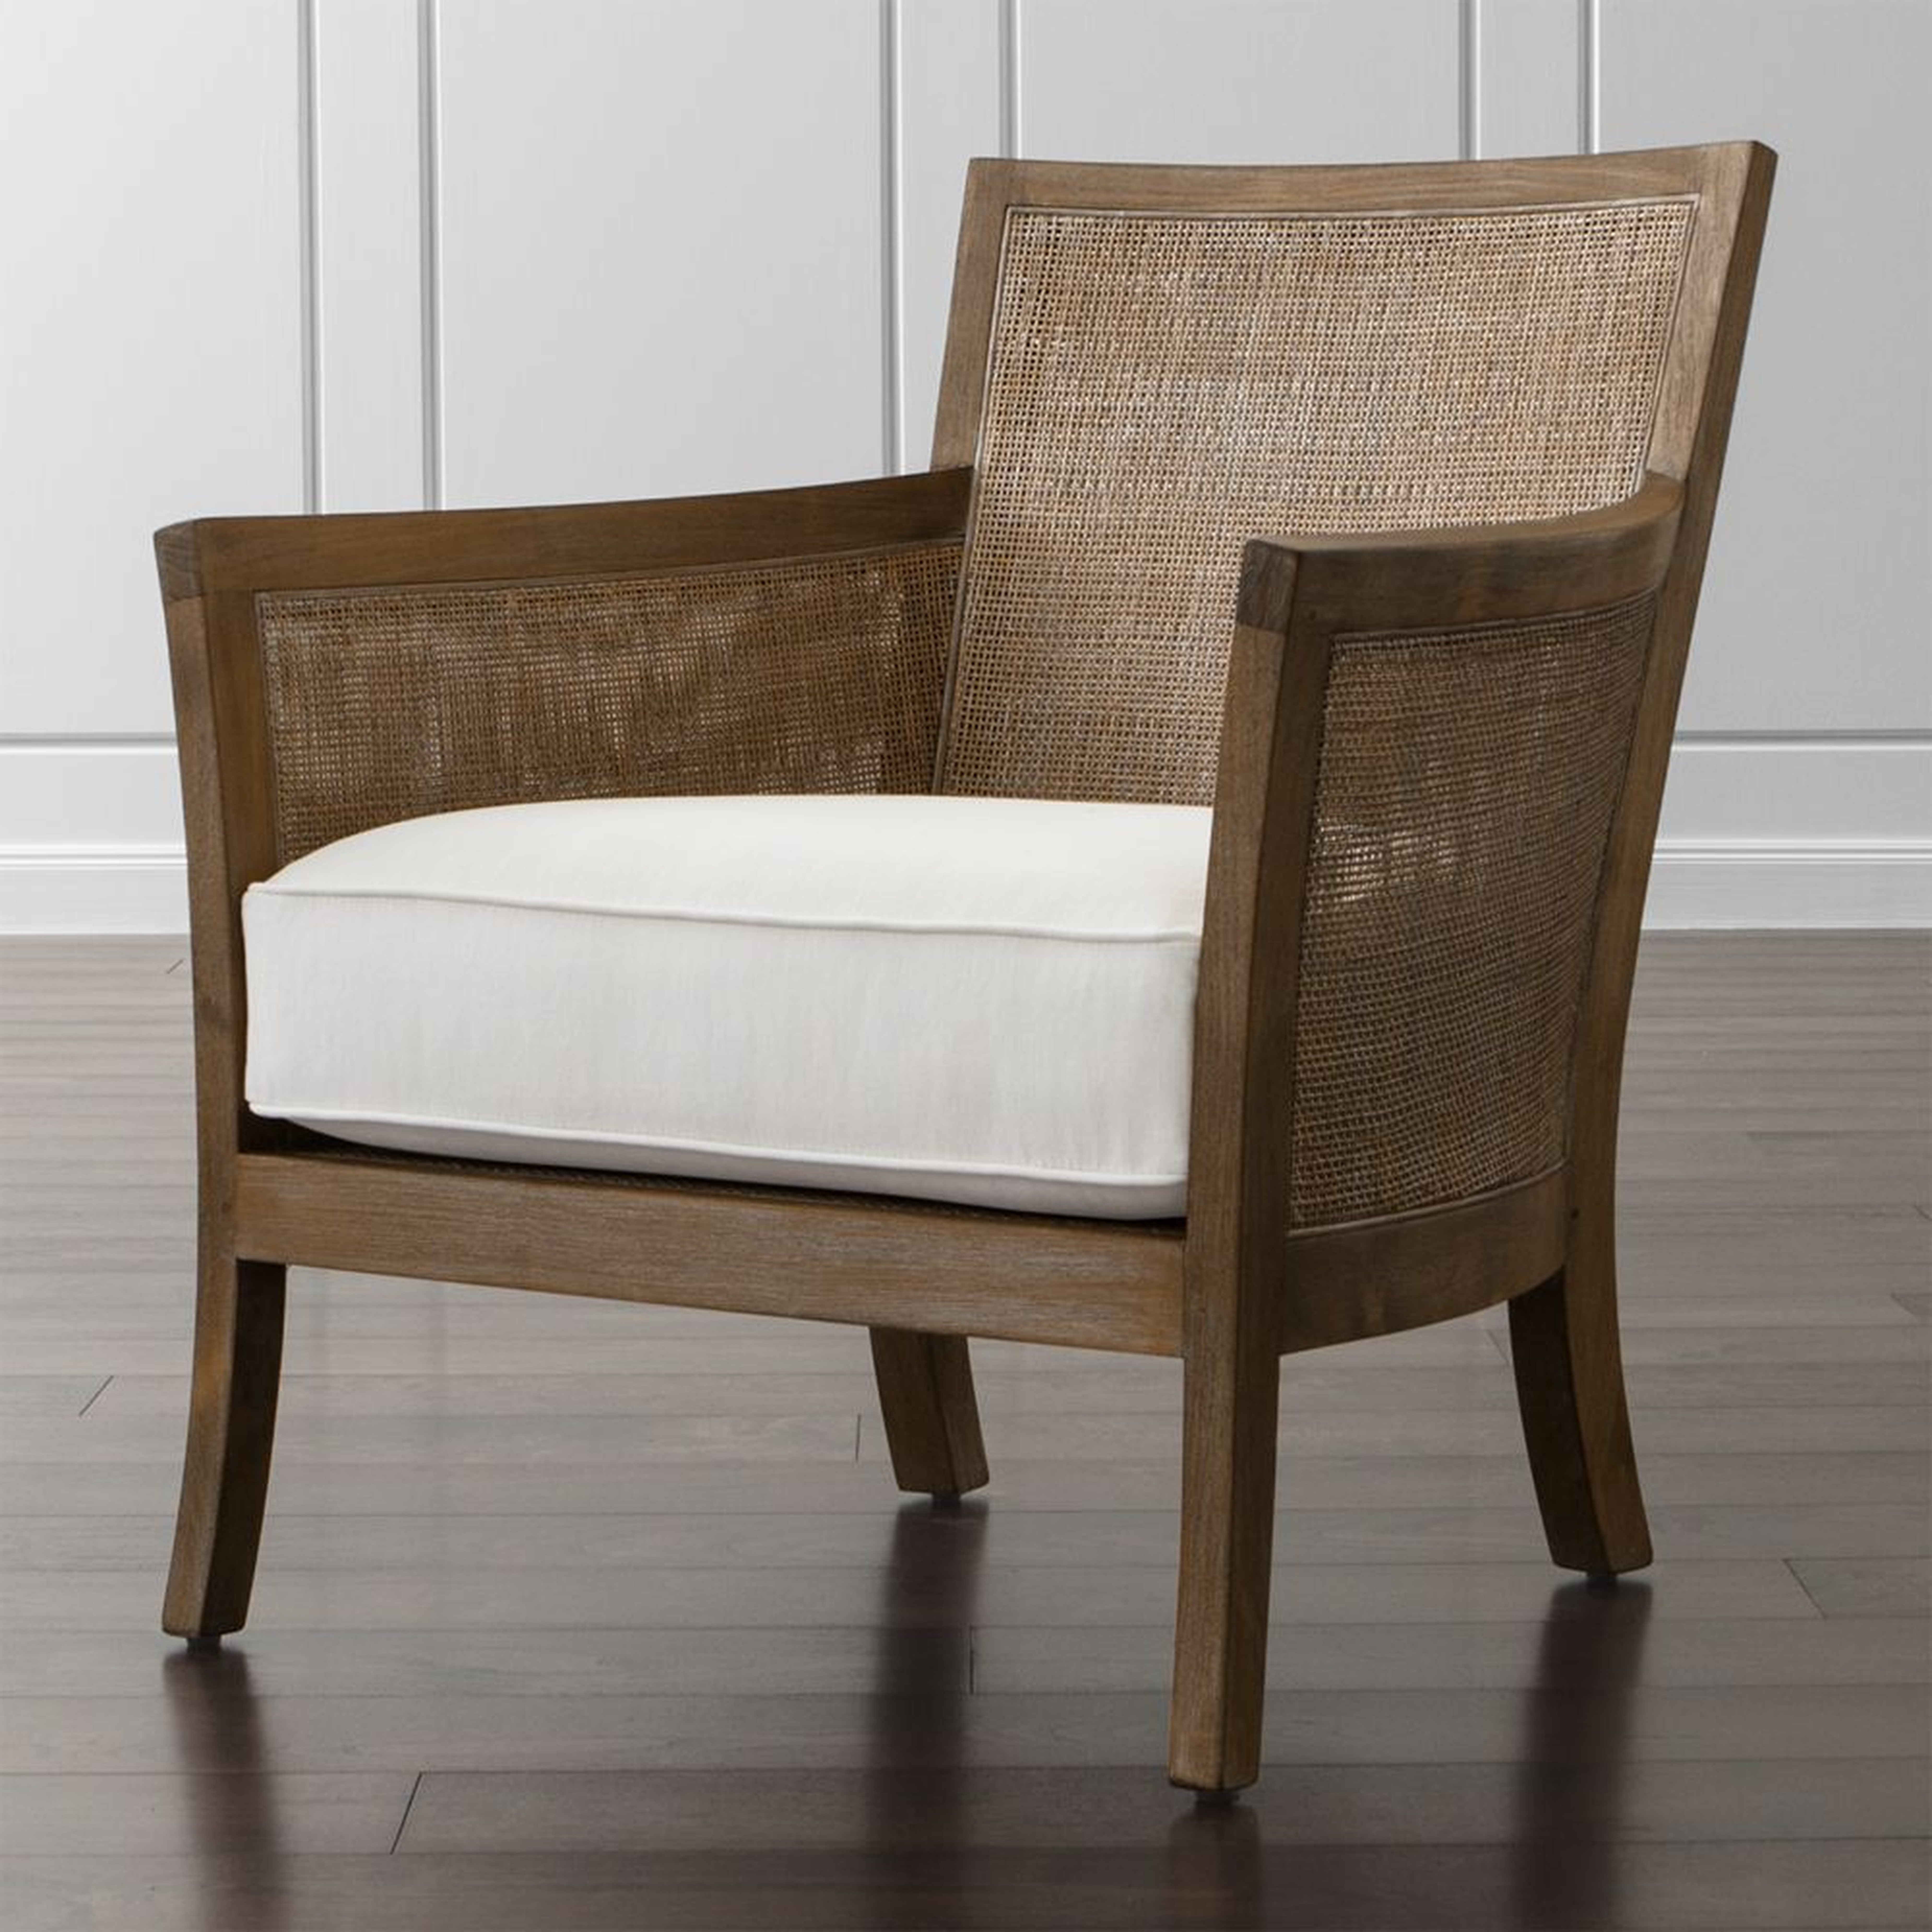 Blake Grey Wash Chair with Fabric Cushion - Crate and Barrel